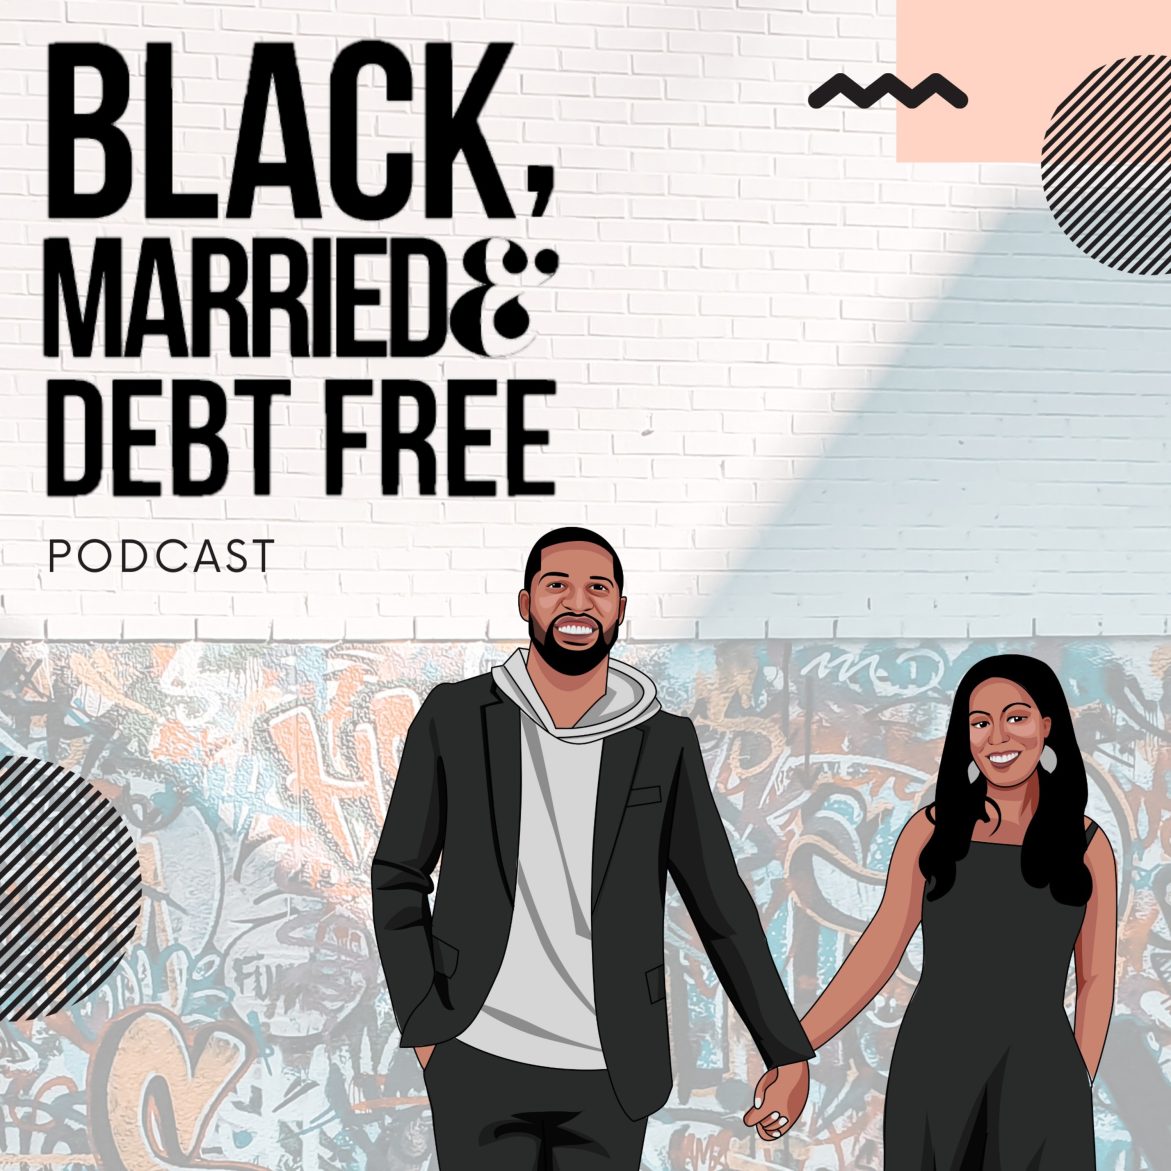 Black Podcasting - (EP - 295 NO MUSIC) 🏘️ OUR OUT-OF-STATE REAL ESTATE INVESTING UPDATE | WORST 1ST DATE LOCATIONS REACTION 🤦🏽‍♂️